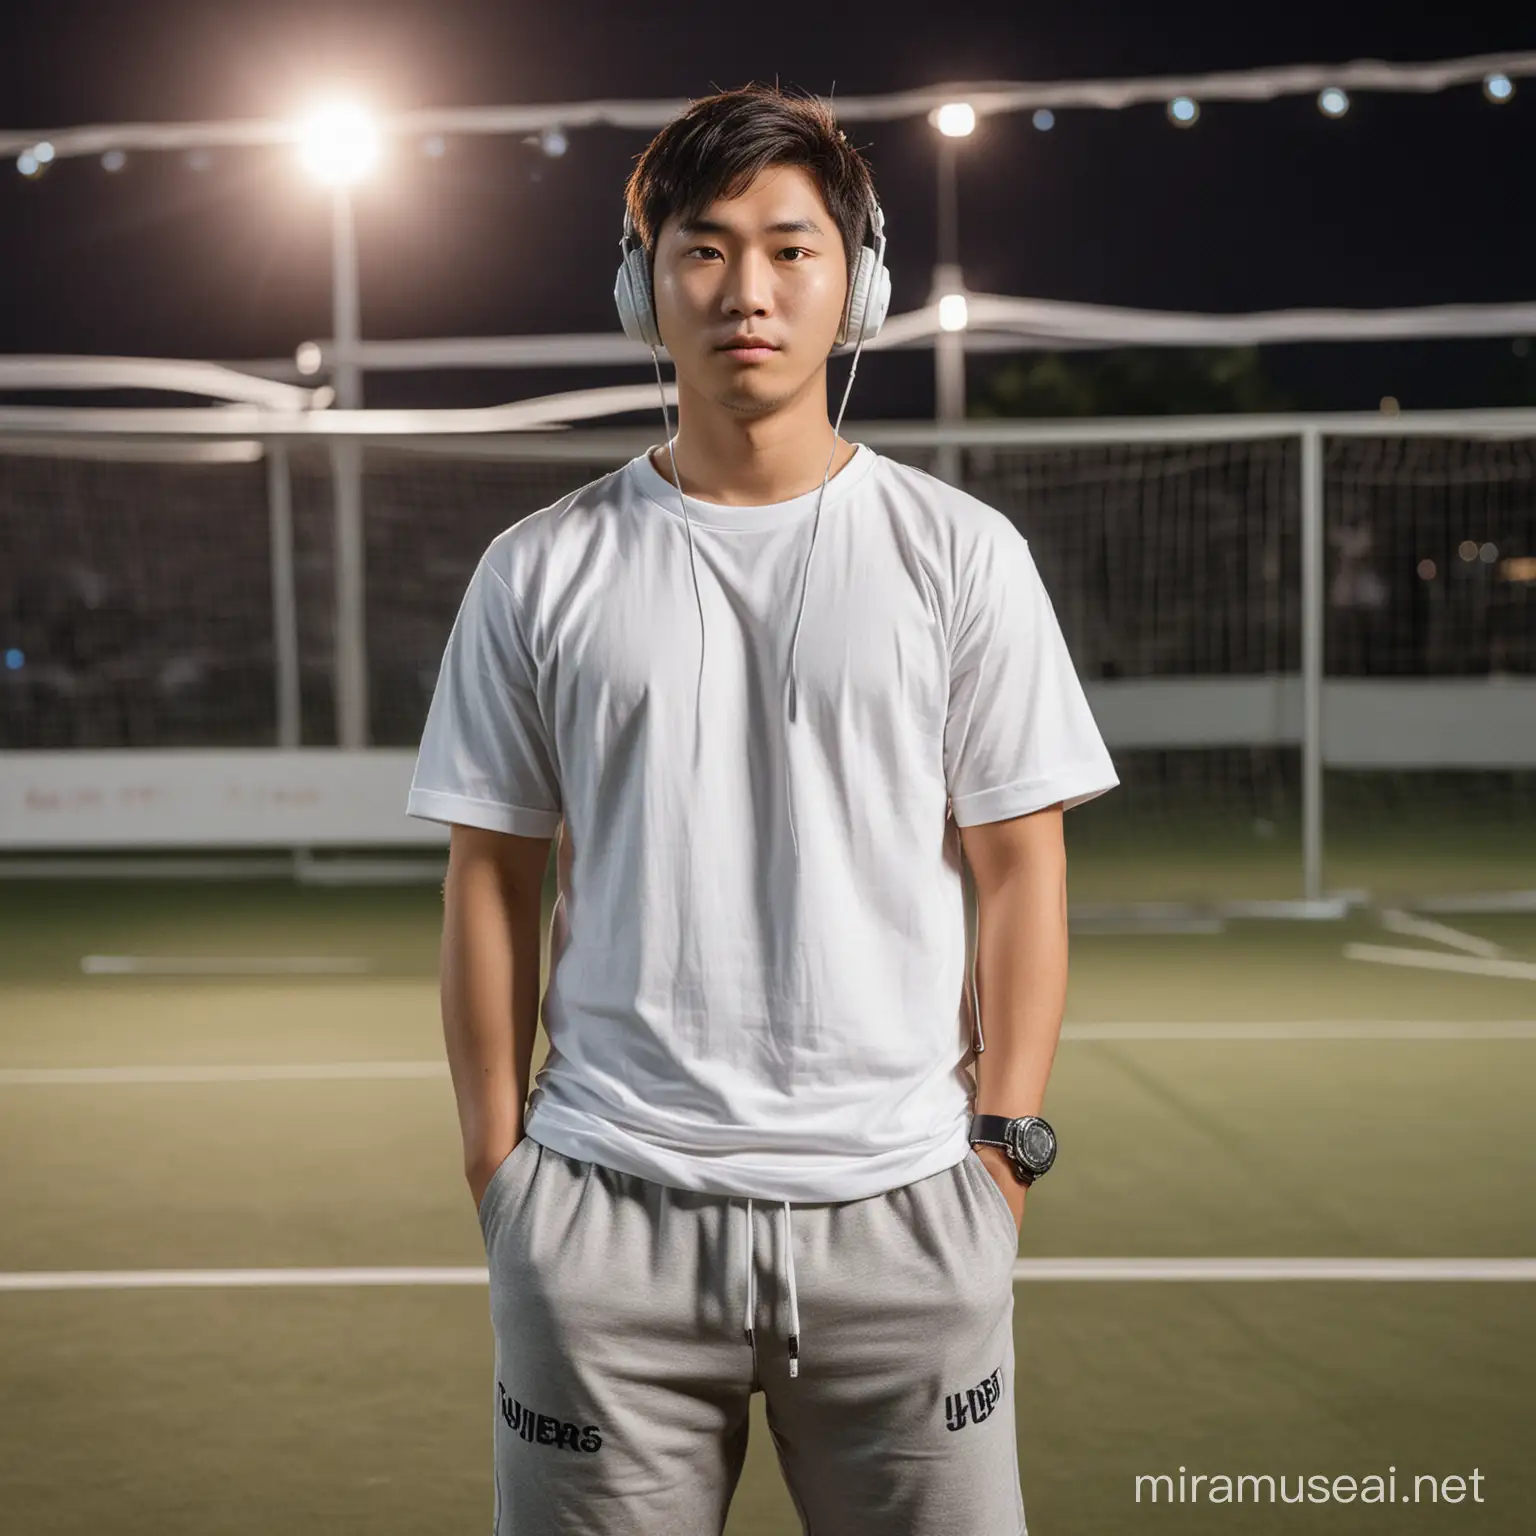 Professional photography, depth of field,chubby face
a Korean man with short hair, 28 years old,
medium height, white headphones around his
neck, wearing a white shirt with the
text
shorts and white shoes,
standing with a skateboard in his hand,
leaning back. on a wire fence of a Futsal
field, taken from the best angle, night
portrait with lights, cinematic, looking at
the camera


